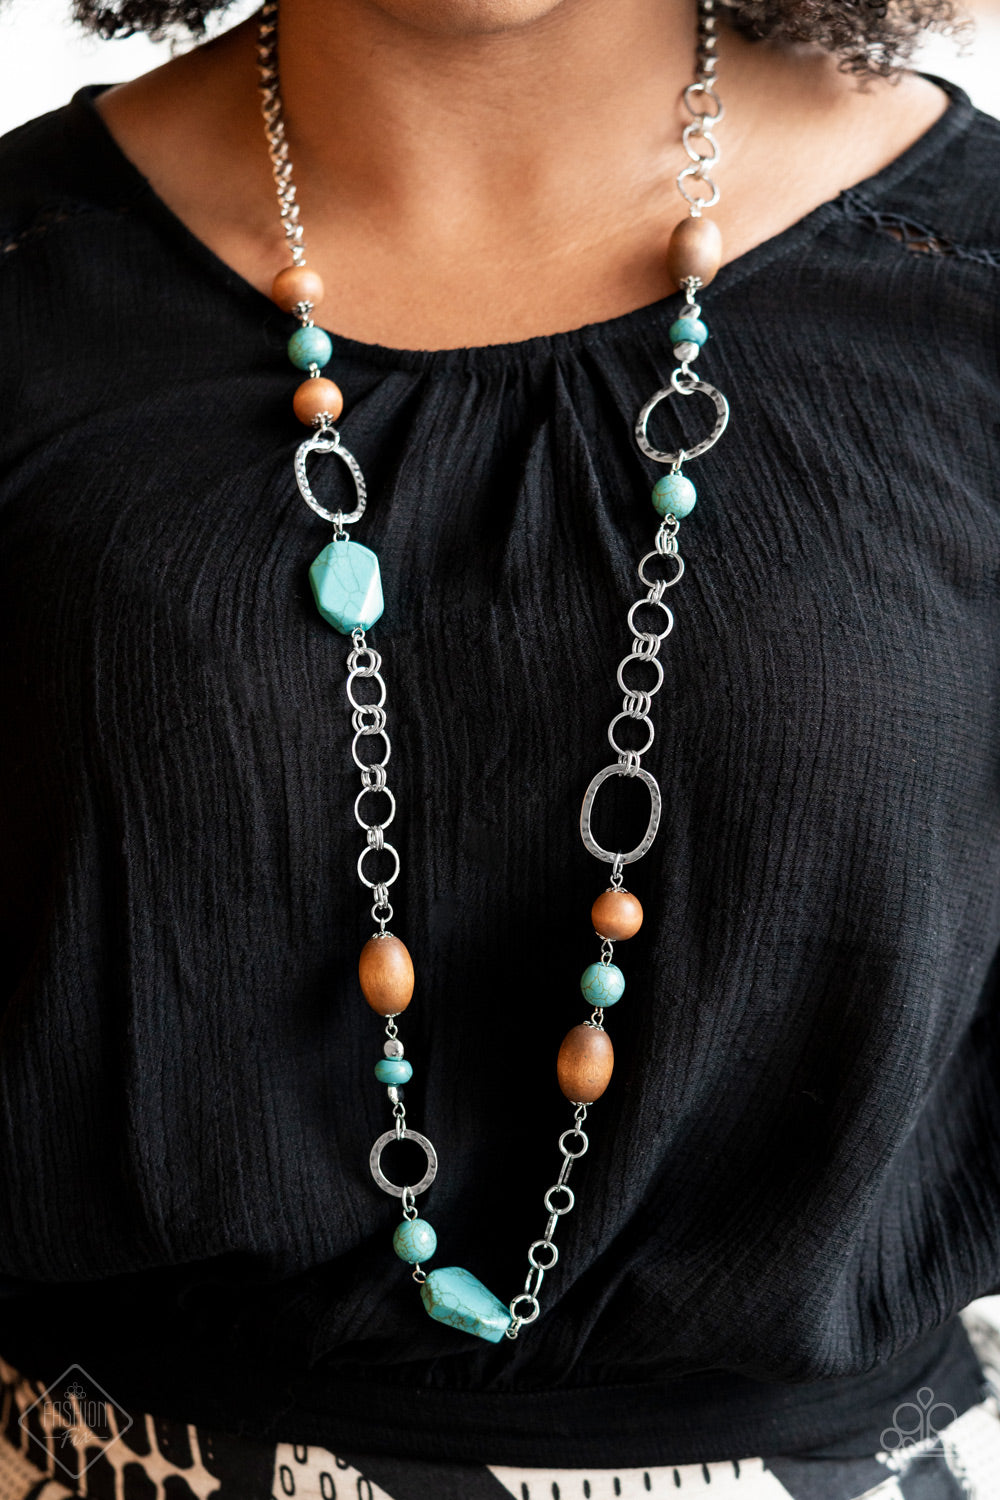 Prairie Reserve - Blue Stone and Brown Wooden Beads Necklace - June 2021 Fashion Fix Paparazzi Accessories